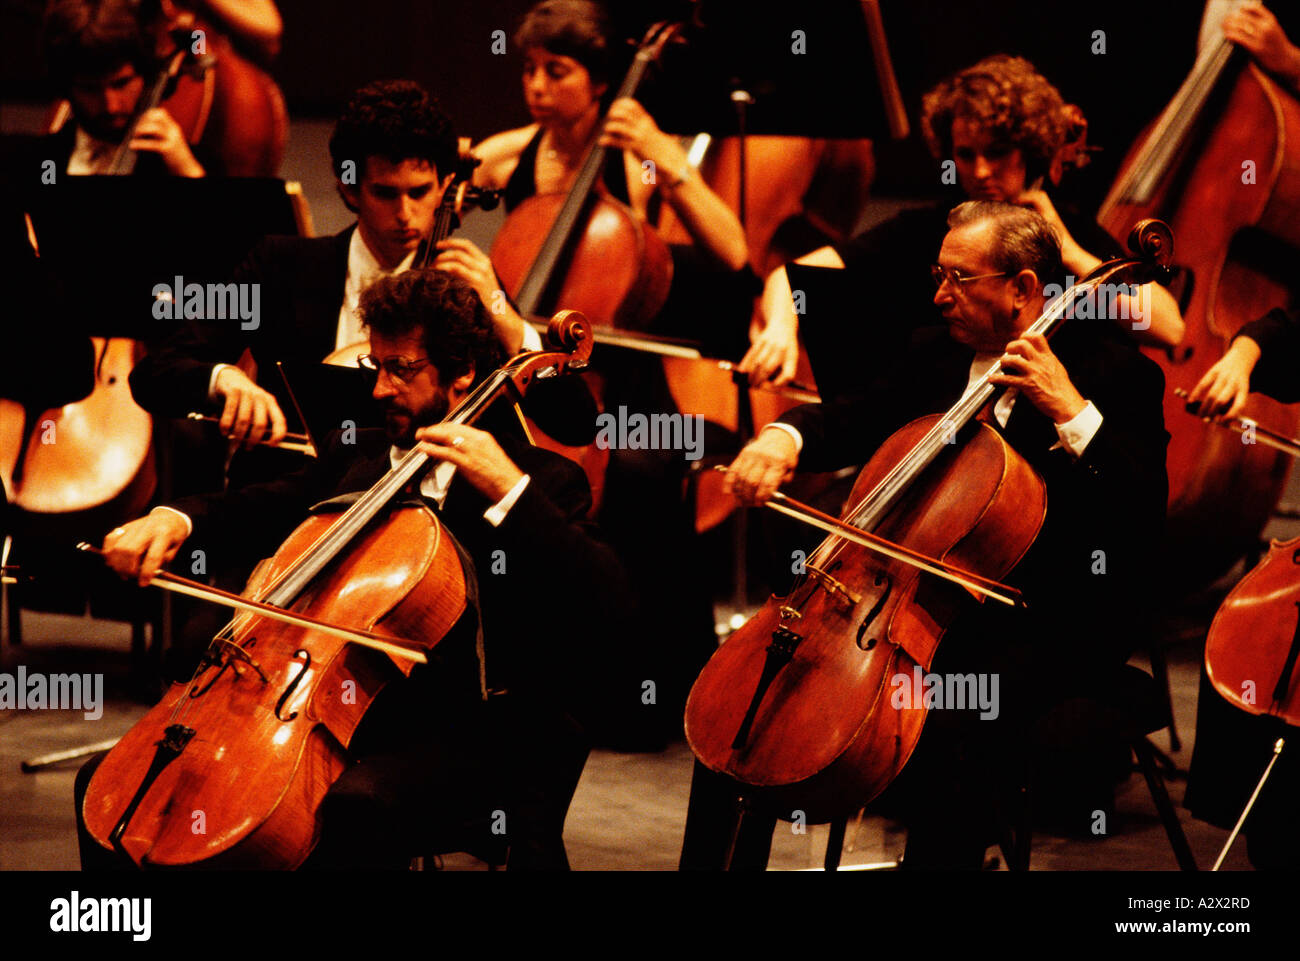 View of men playing cellos in orchestra. Stock Photo